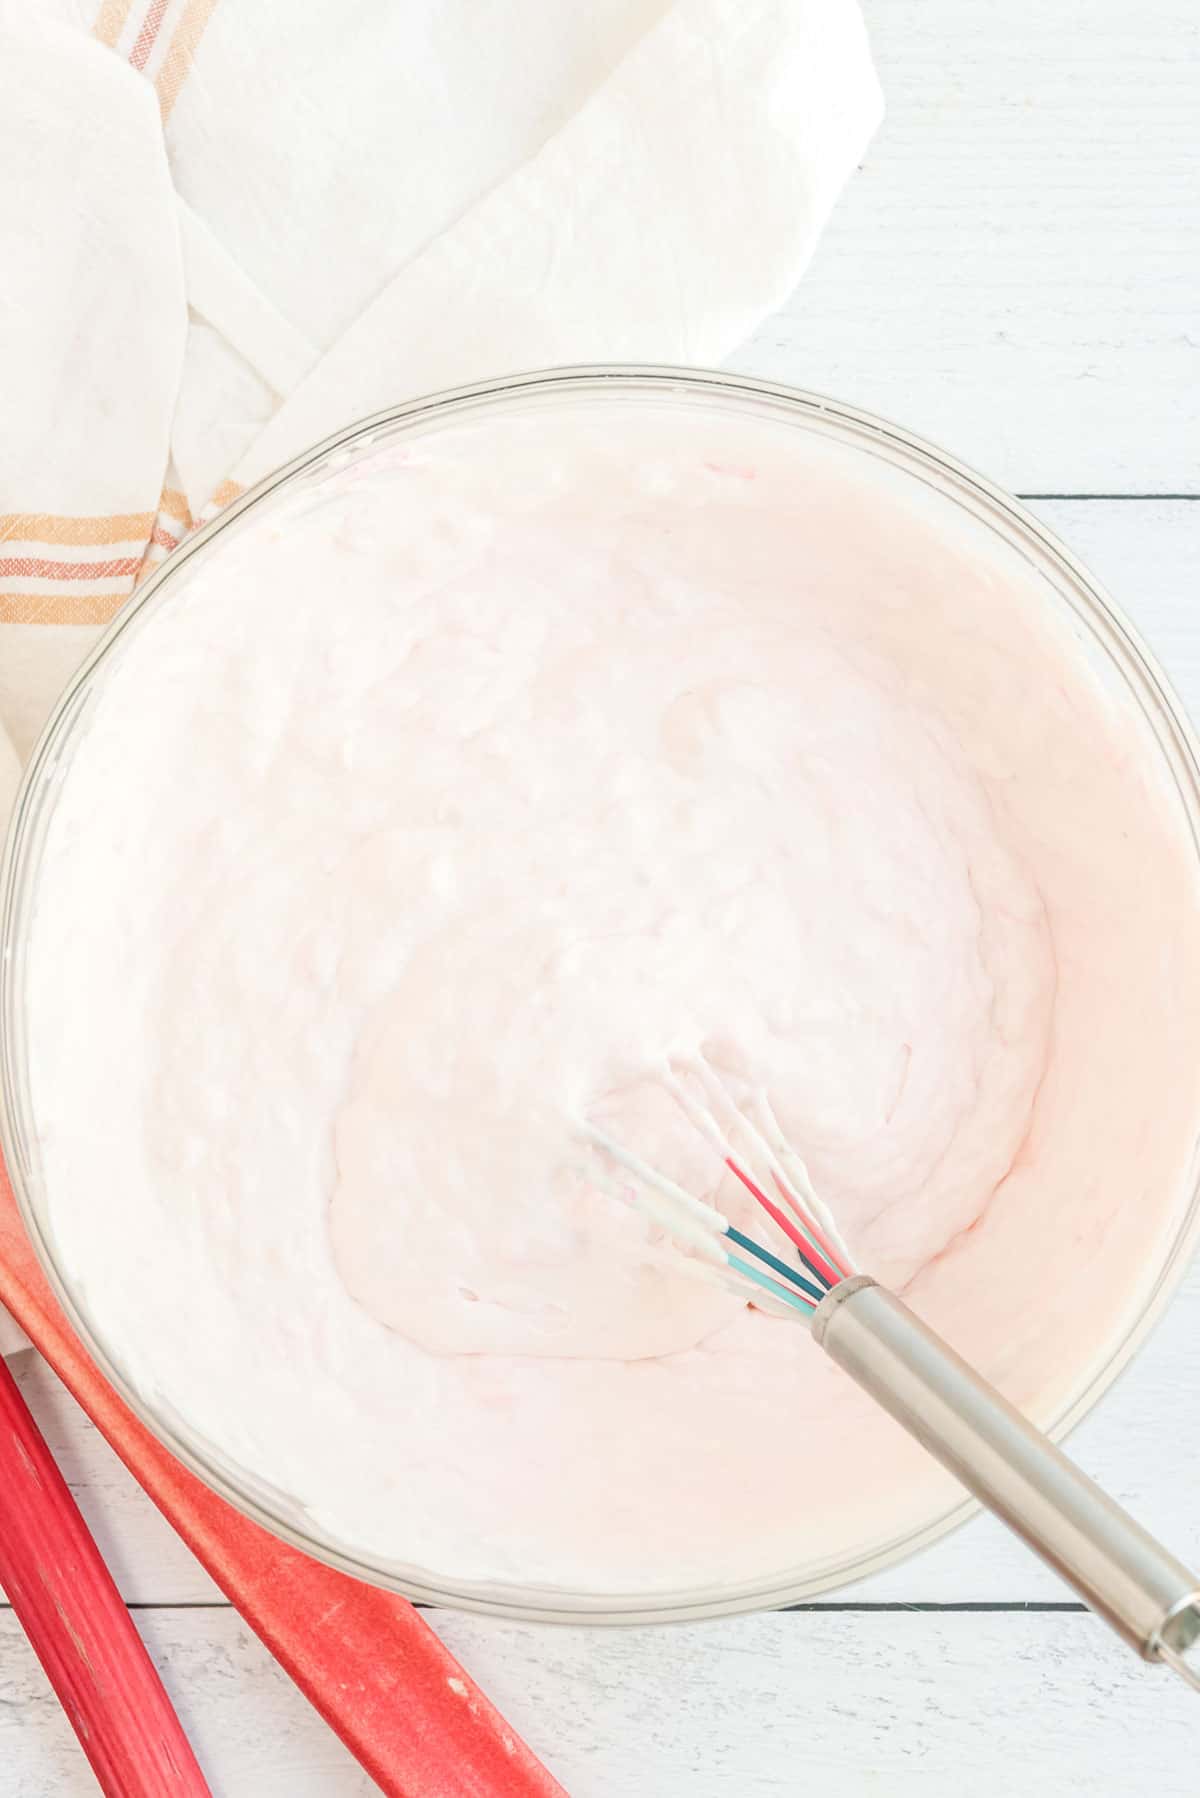 rhubarb and condensed milk mixed in with whipped cream in glass bowl